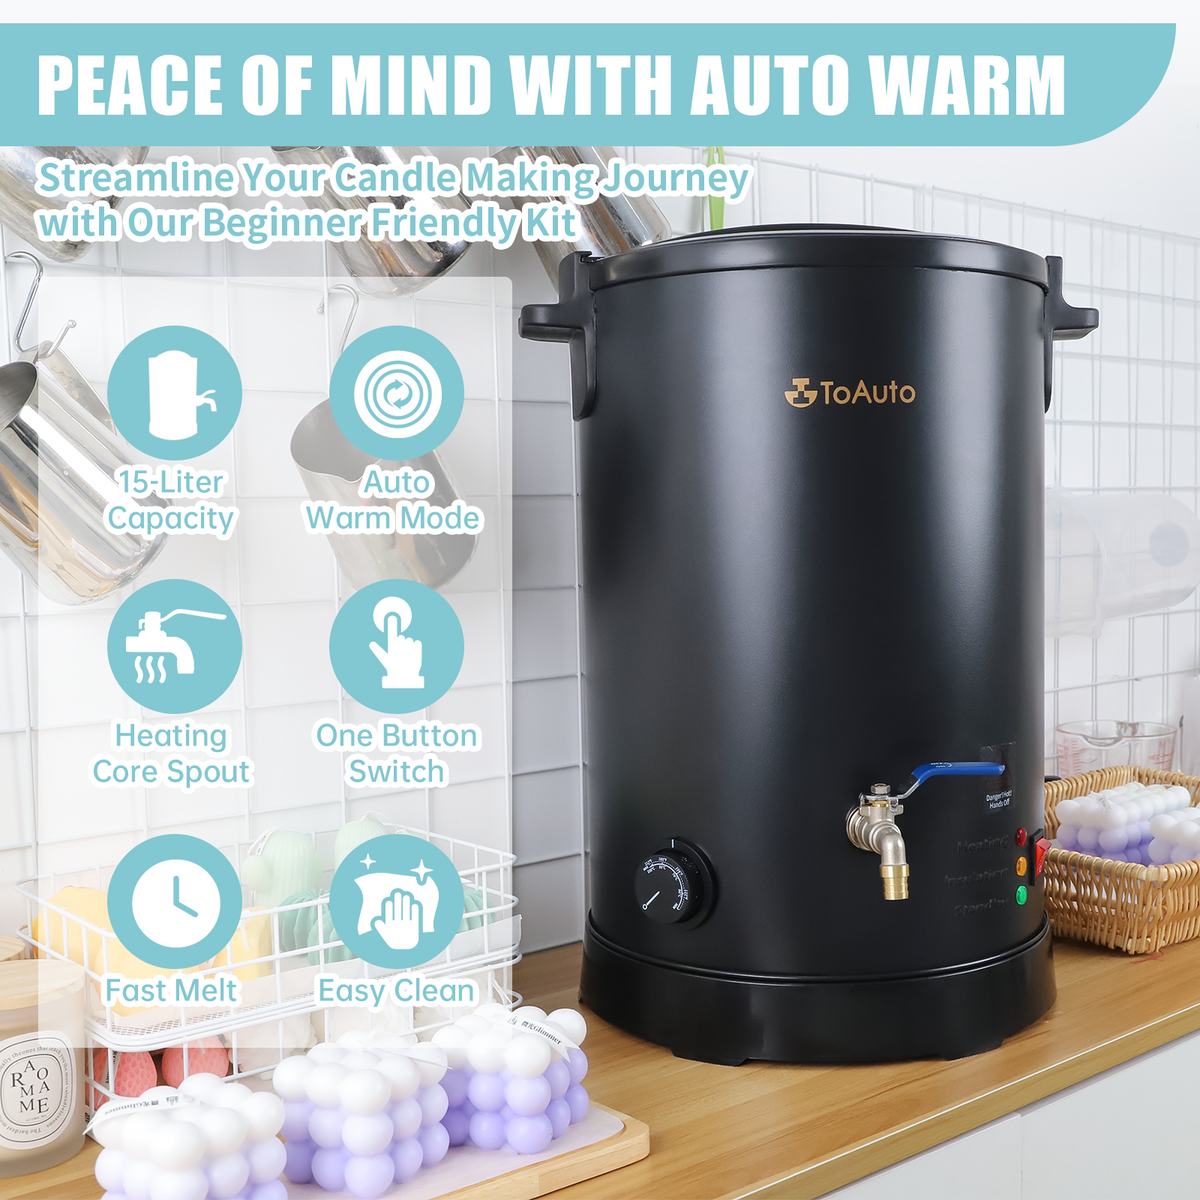 TOAUTO Wmf-8l Large Wax Melter for Candle Making, Electric Wax Melting Container Holds 8L Melted Wax with Heating Core Spout & Bottom Design for